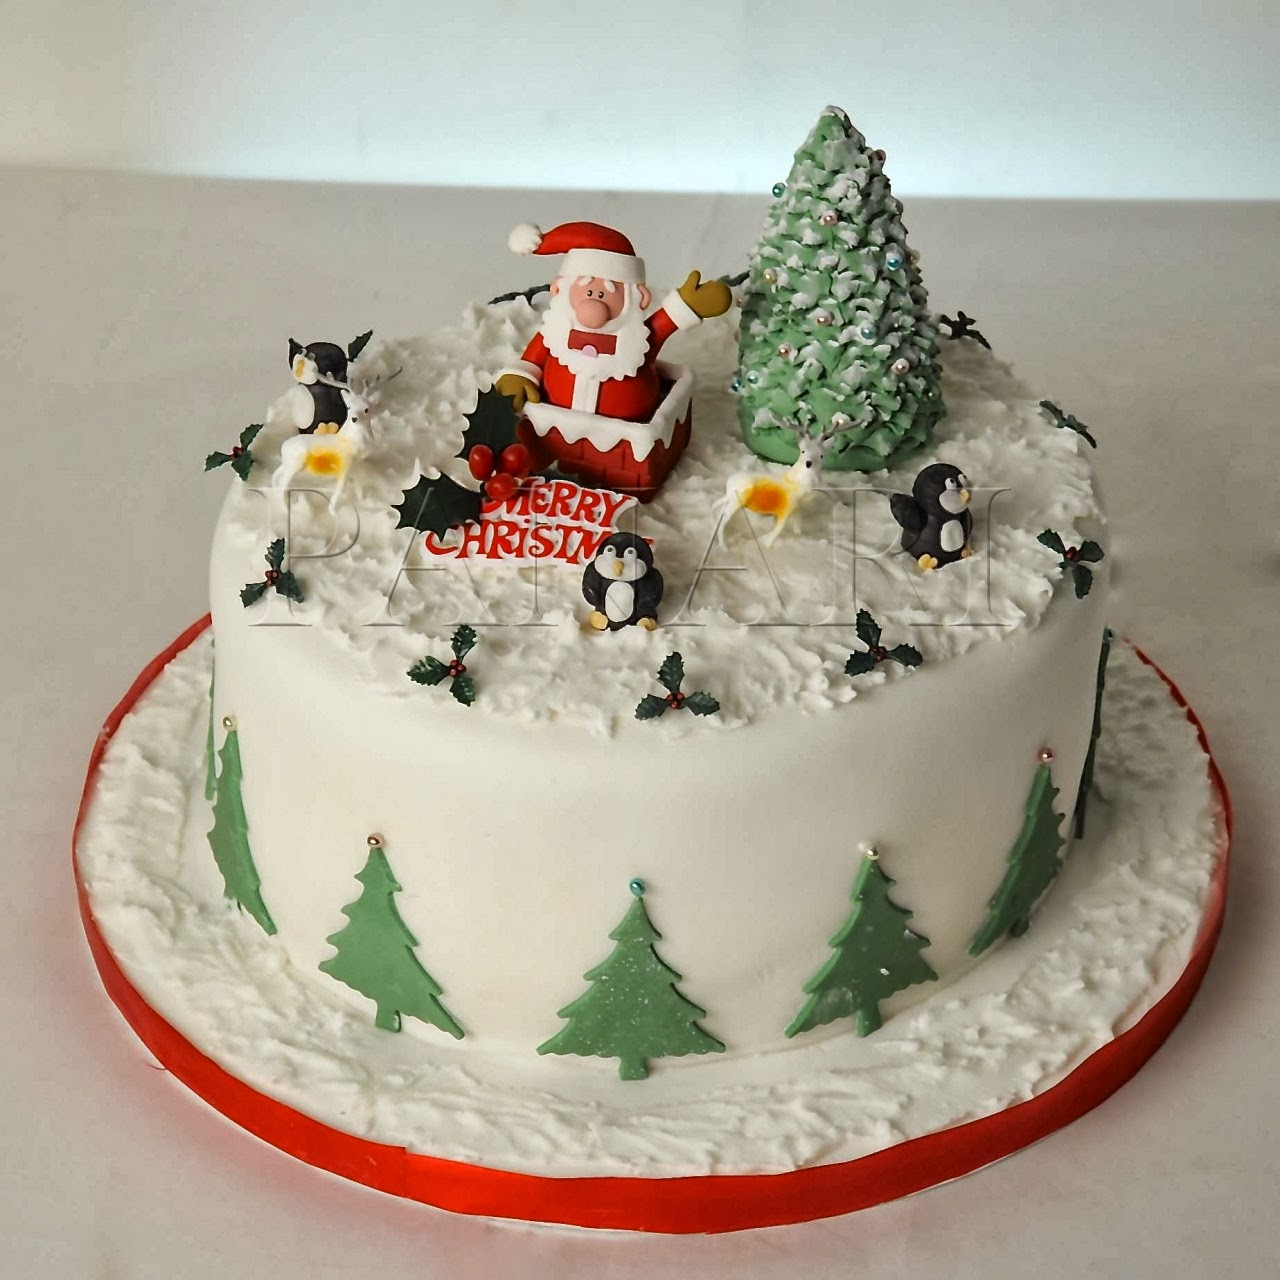 Picture Of Christmas Cakes
 Merry Christmas Cake HD Wallpapers Blog